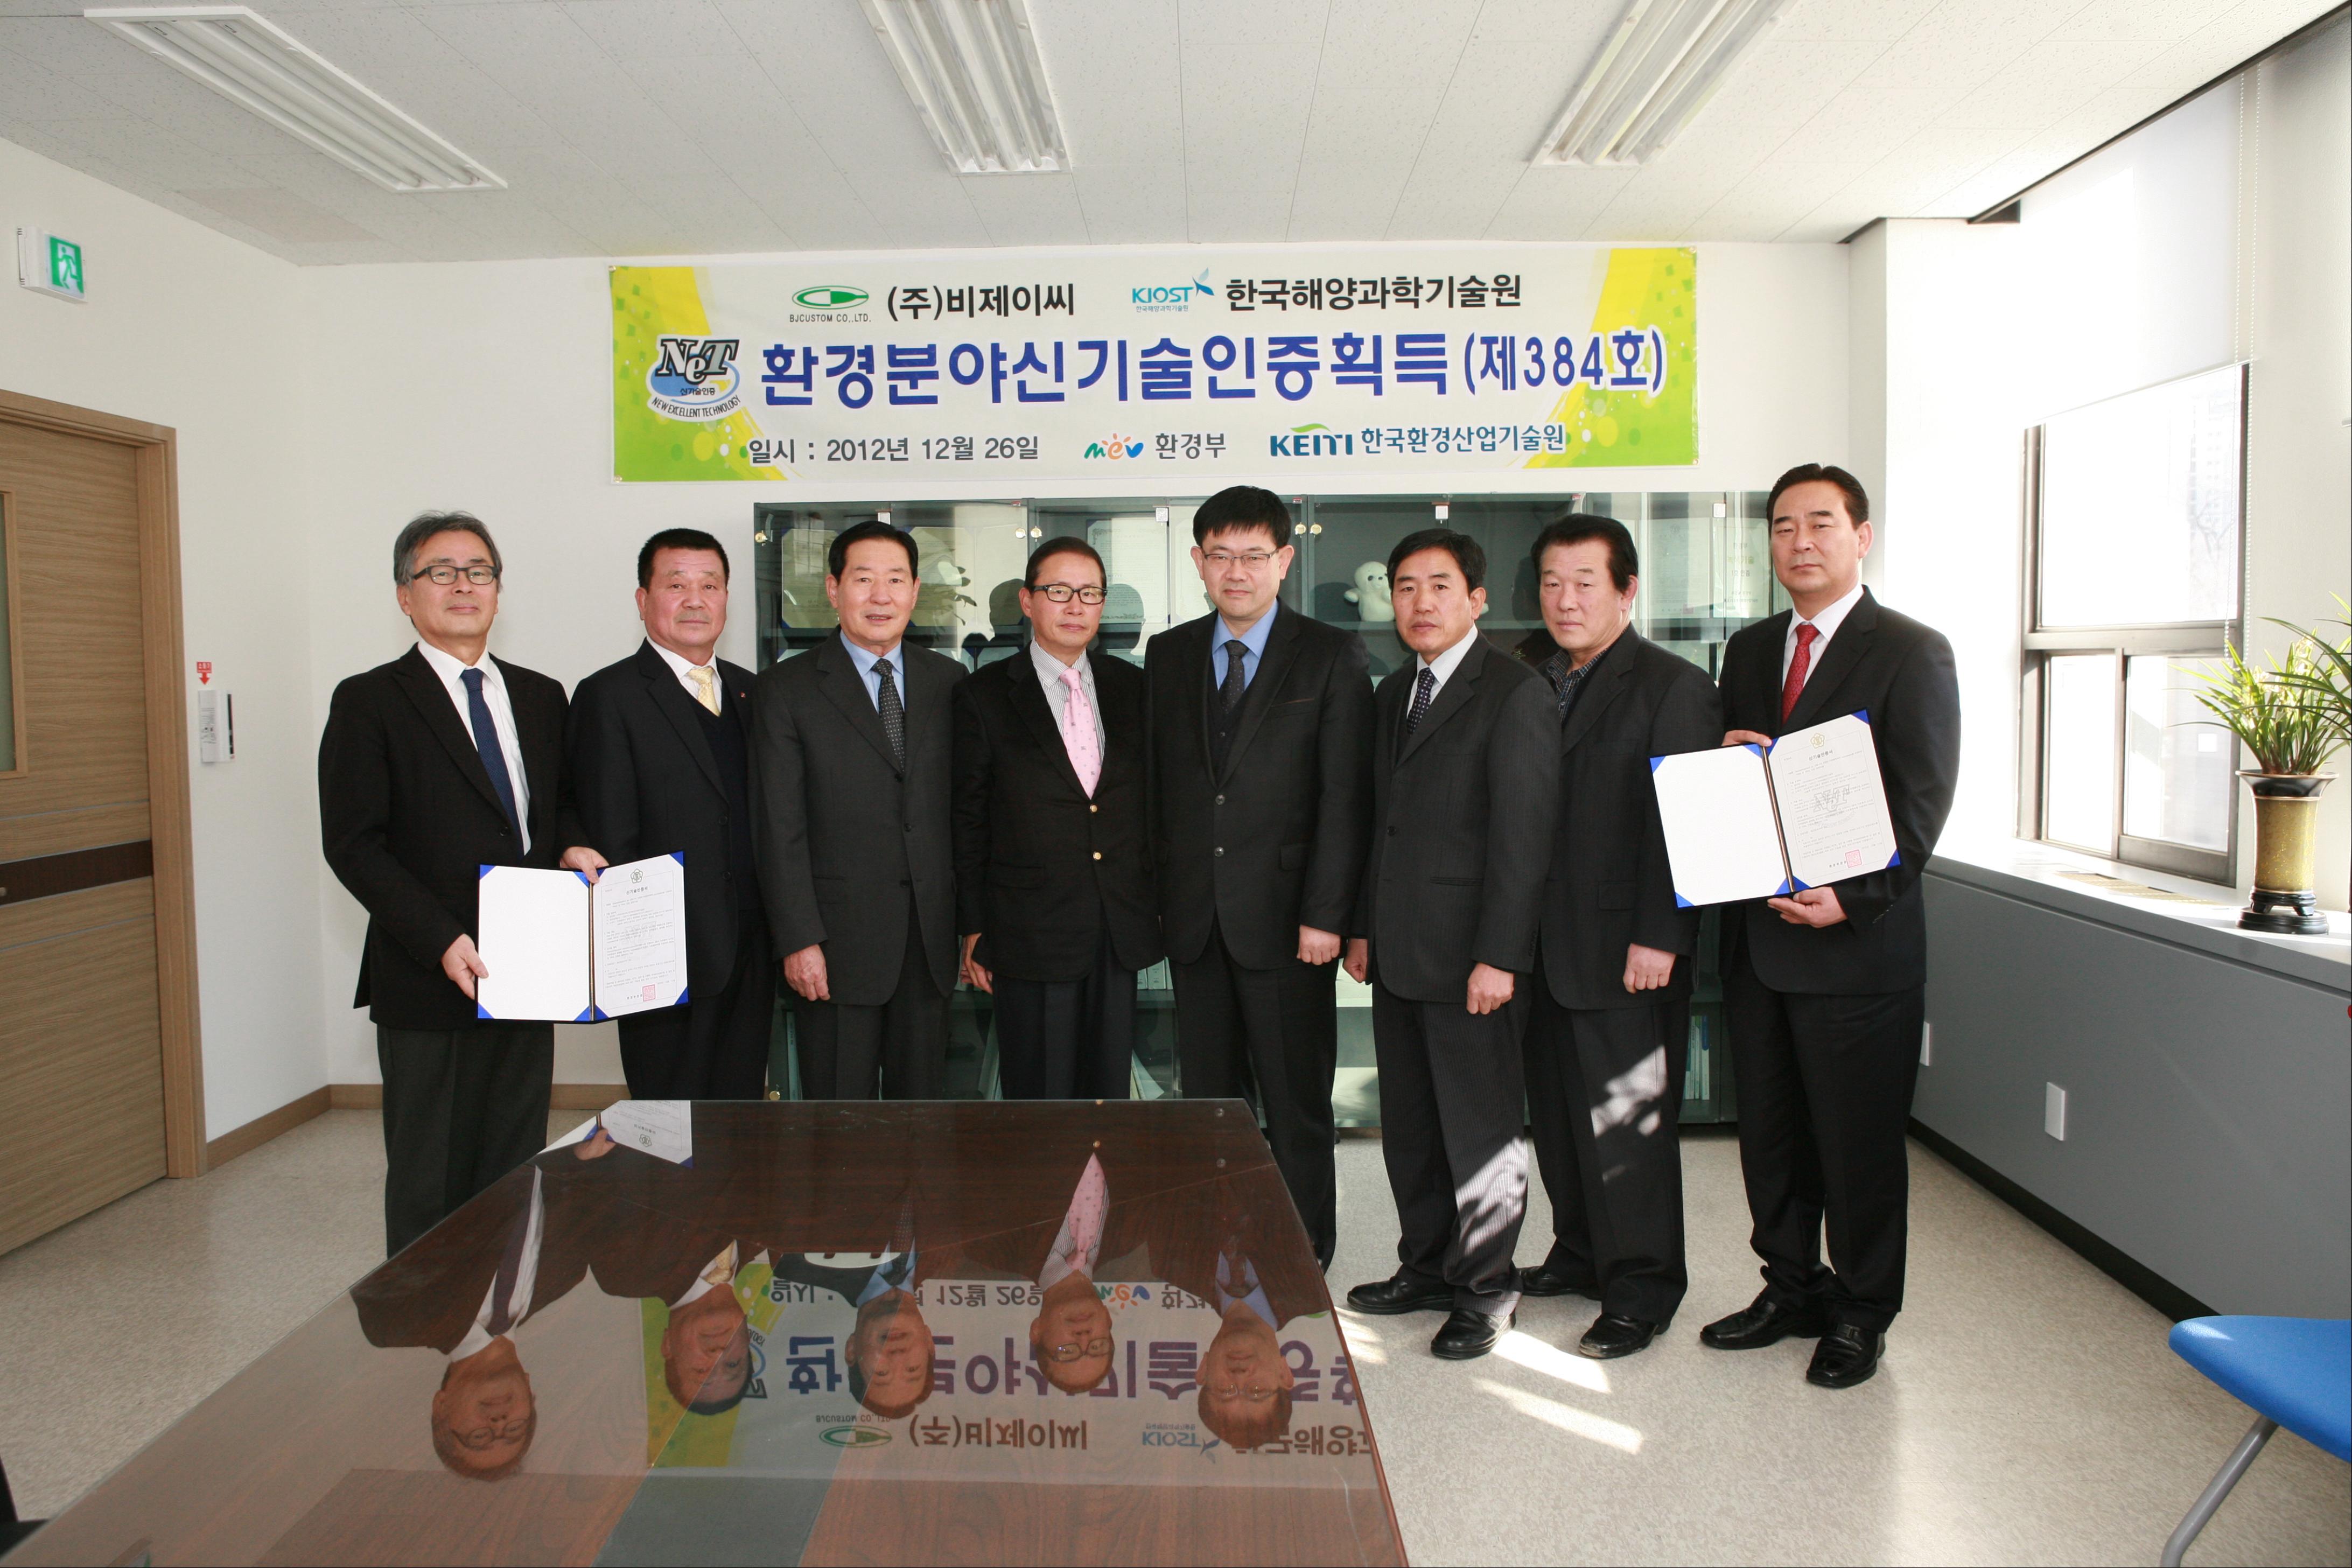 ▲ Dr. Kim Sang Jin of KIOST(First from the left) and President Choi Yong Seul of BJC(First from the right)